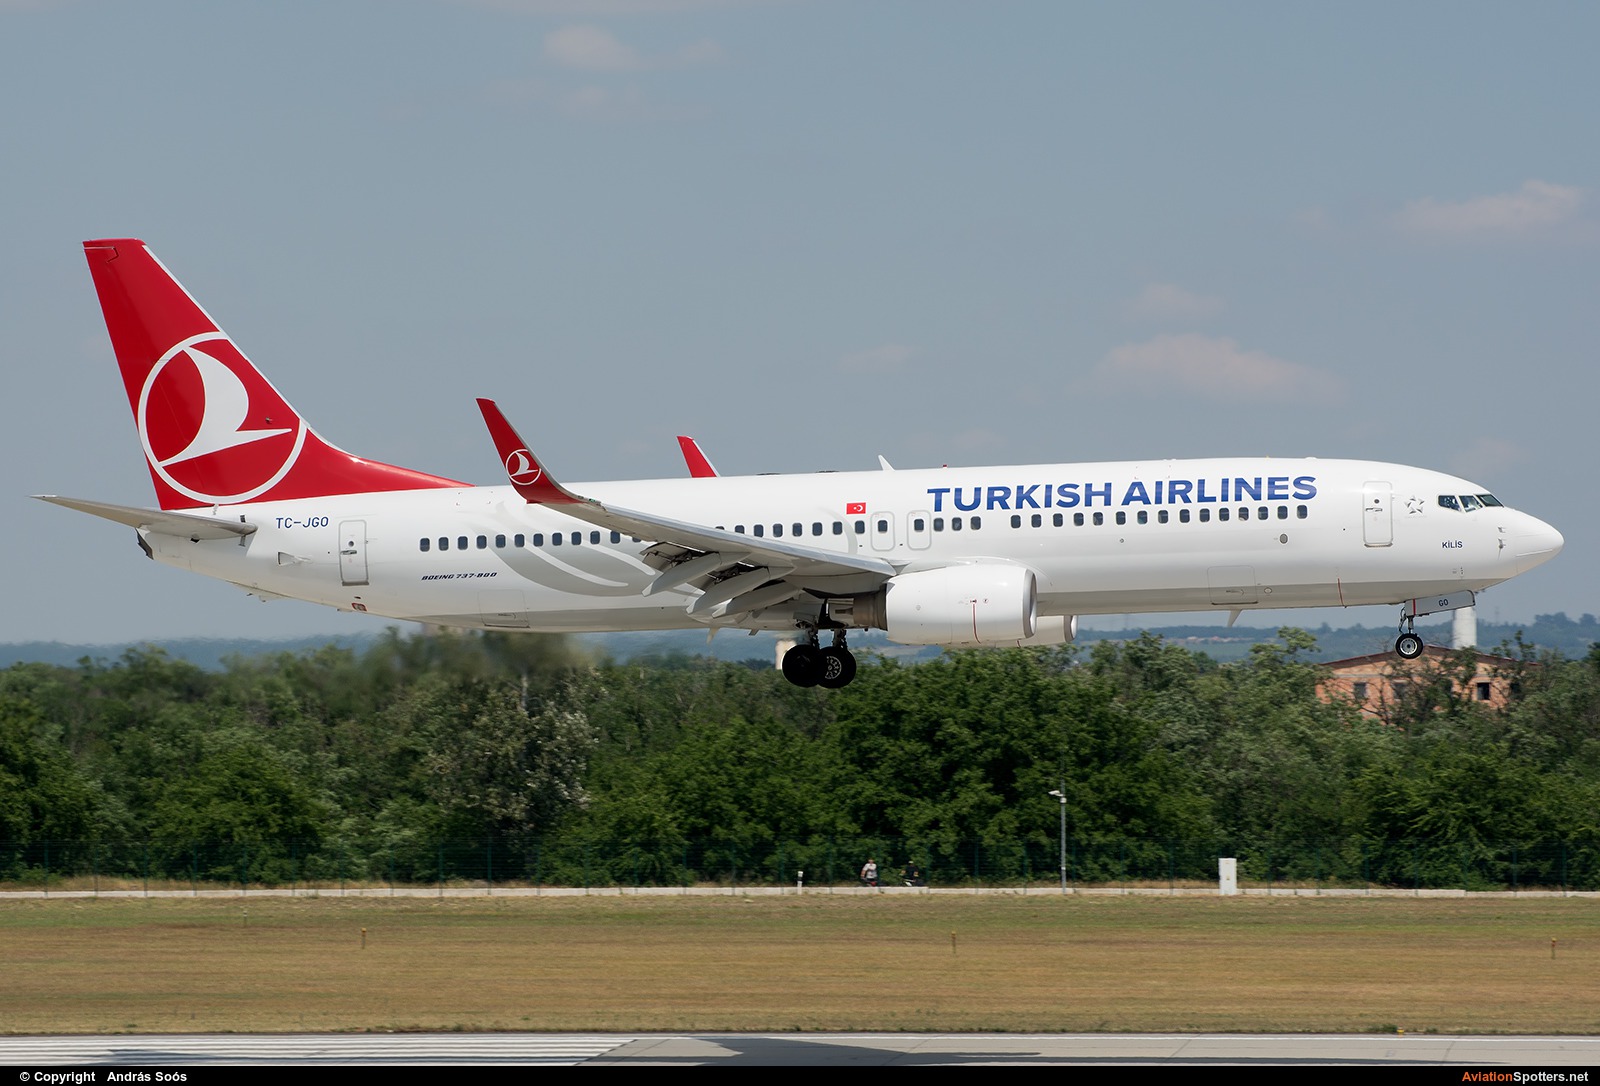 Turkish Airlines  -  737-800  (TC-JGO) By András Soós (sas1965)